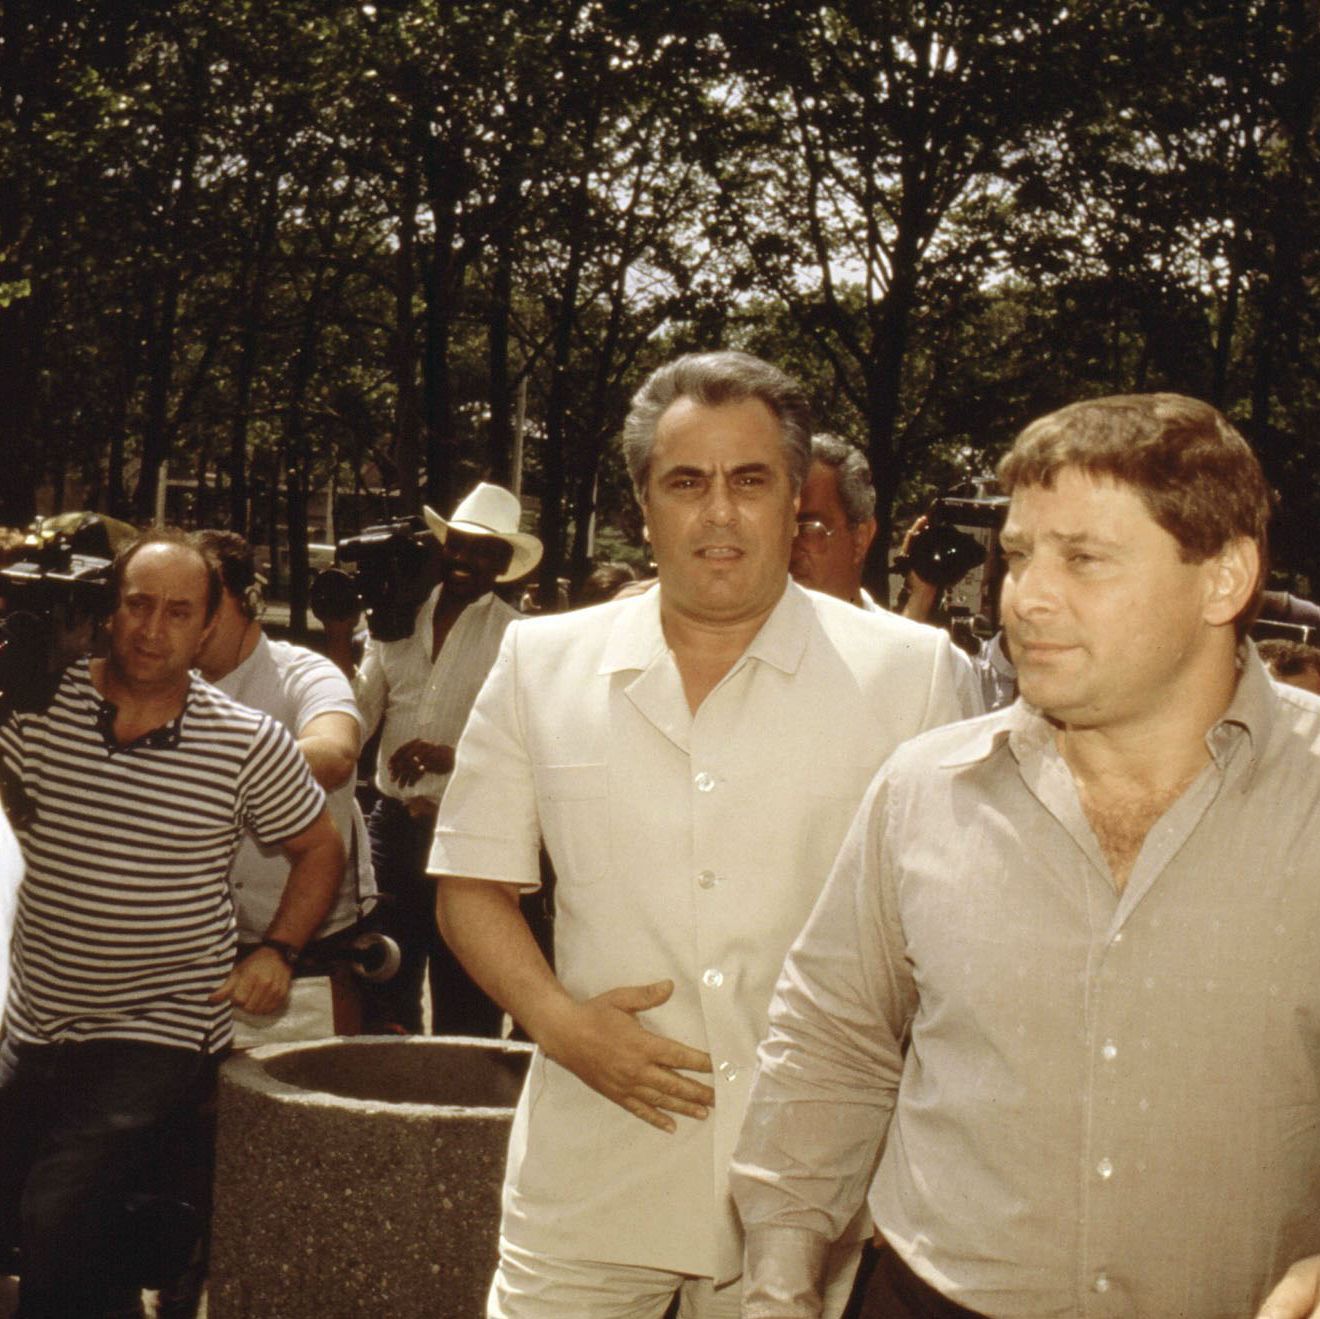 The Court Case That Destroyed John Gotti Wasn't His Own